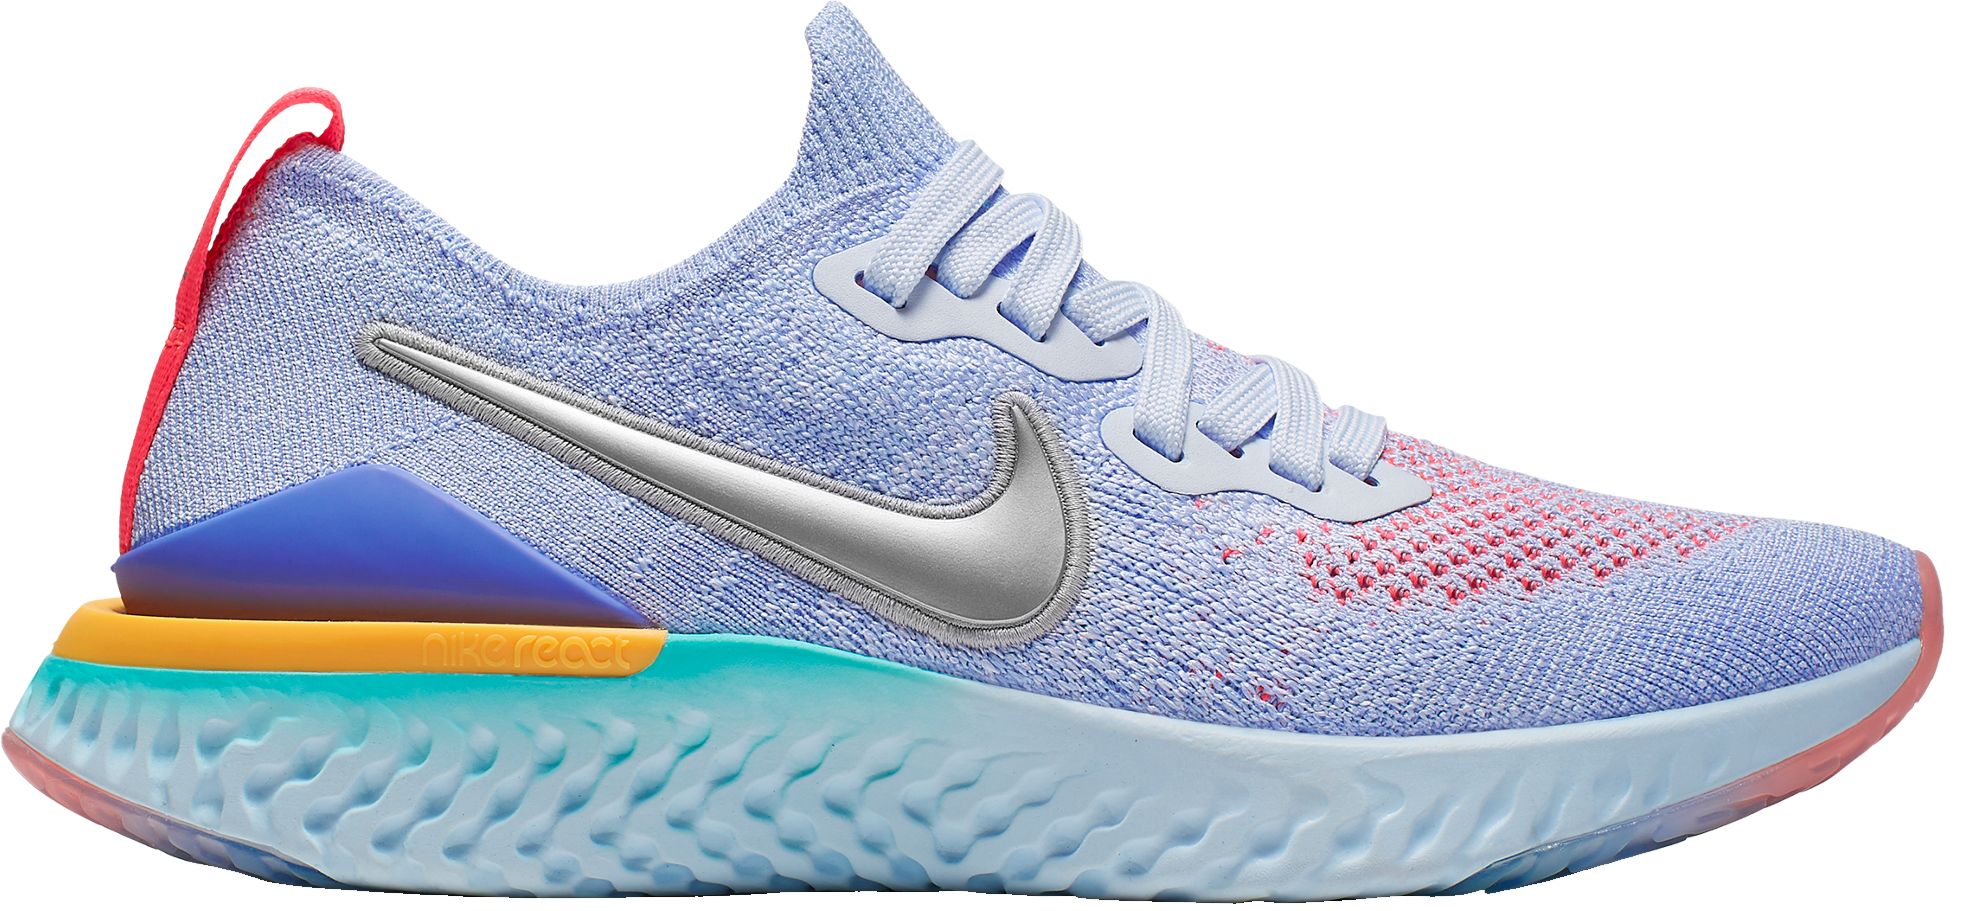 nike epic react flyknit 2 youth